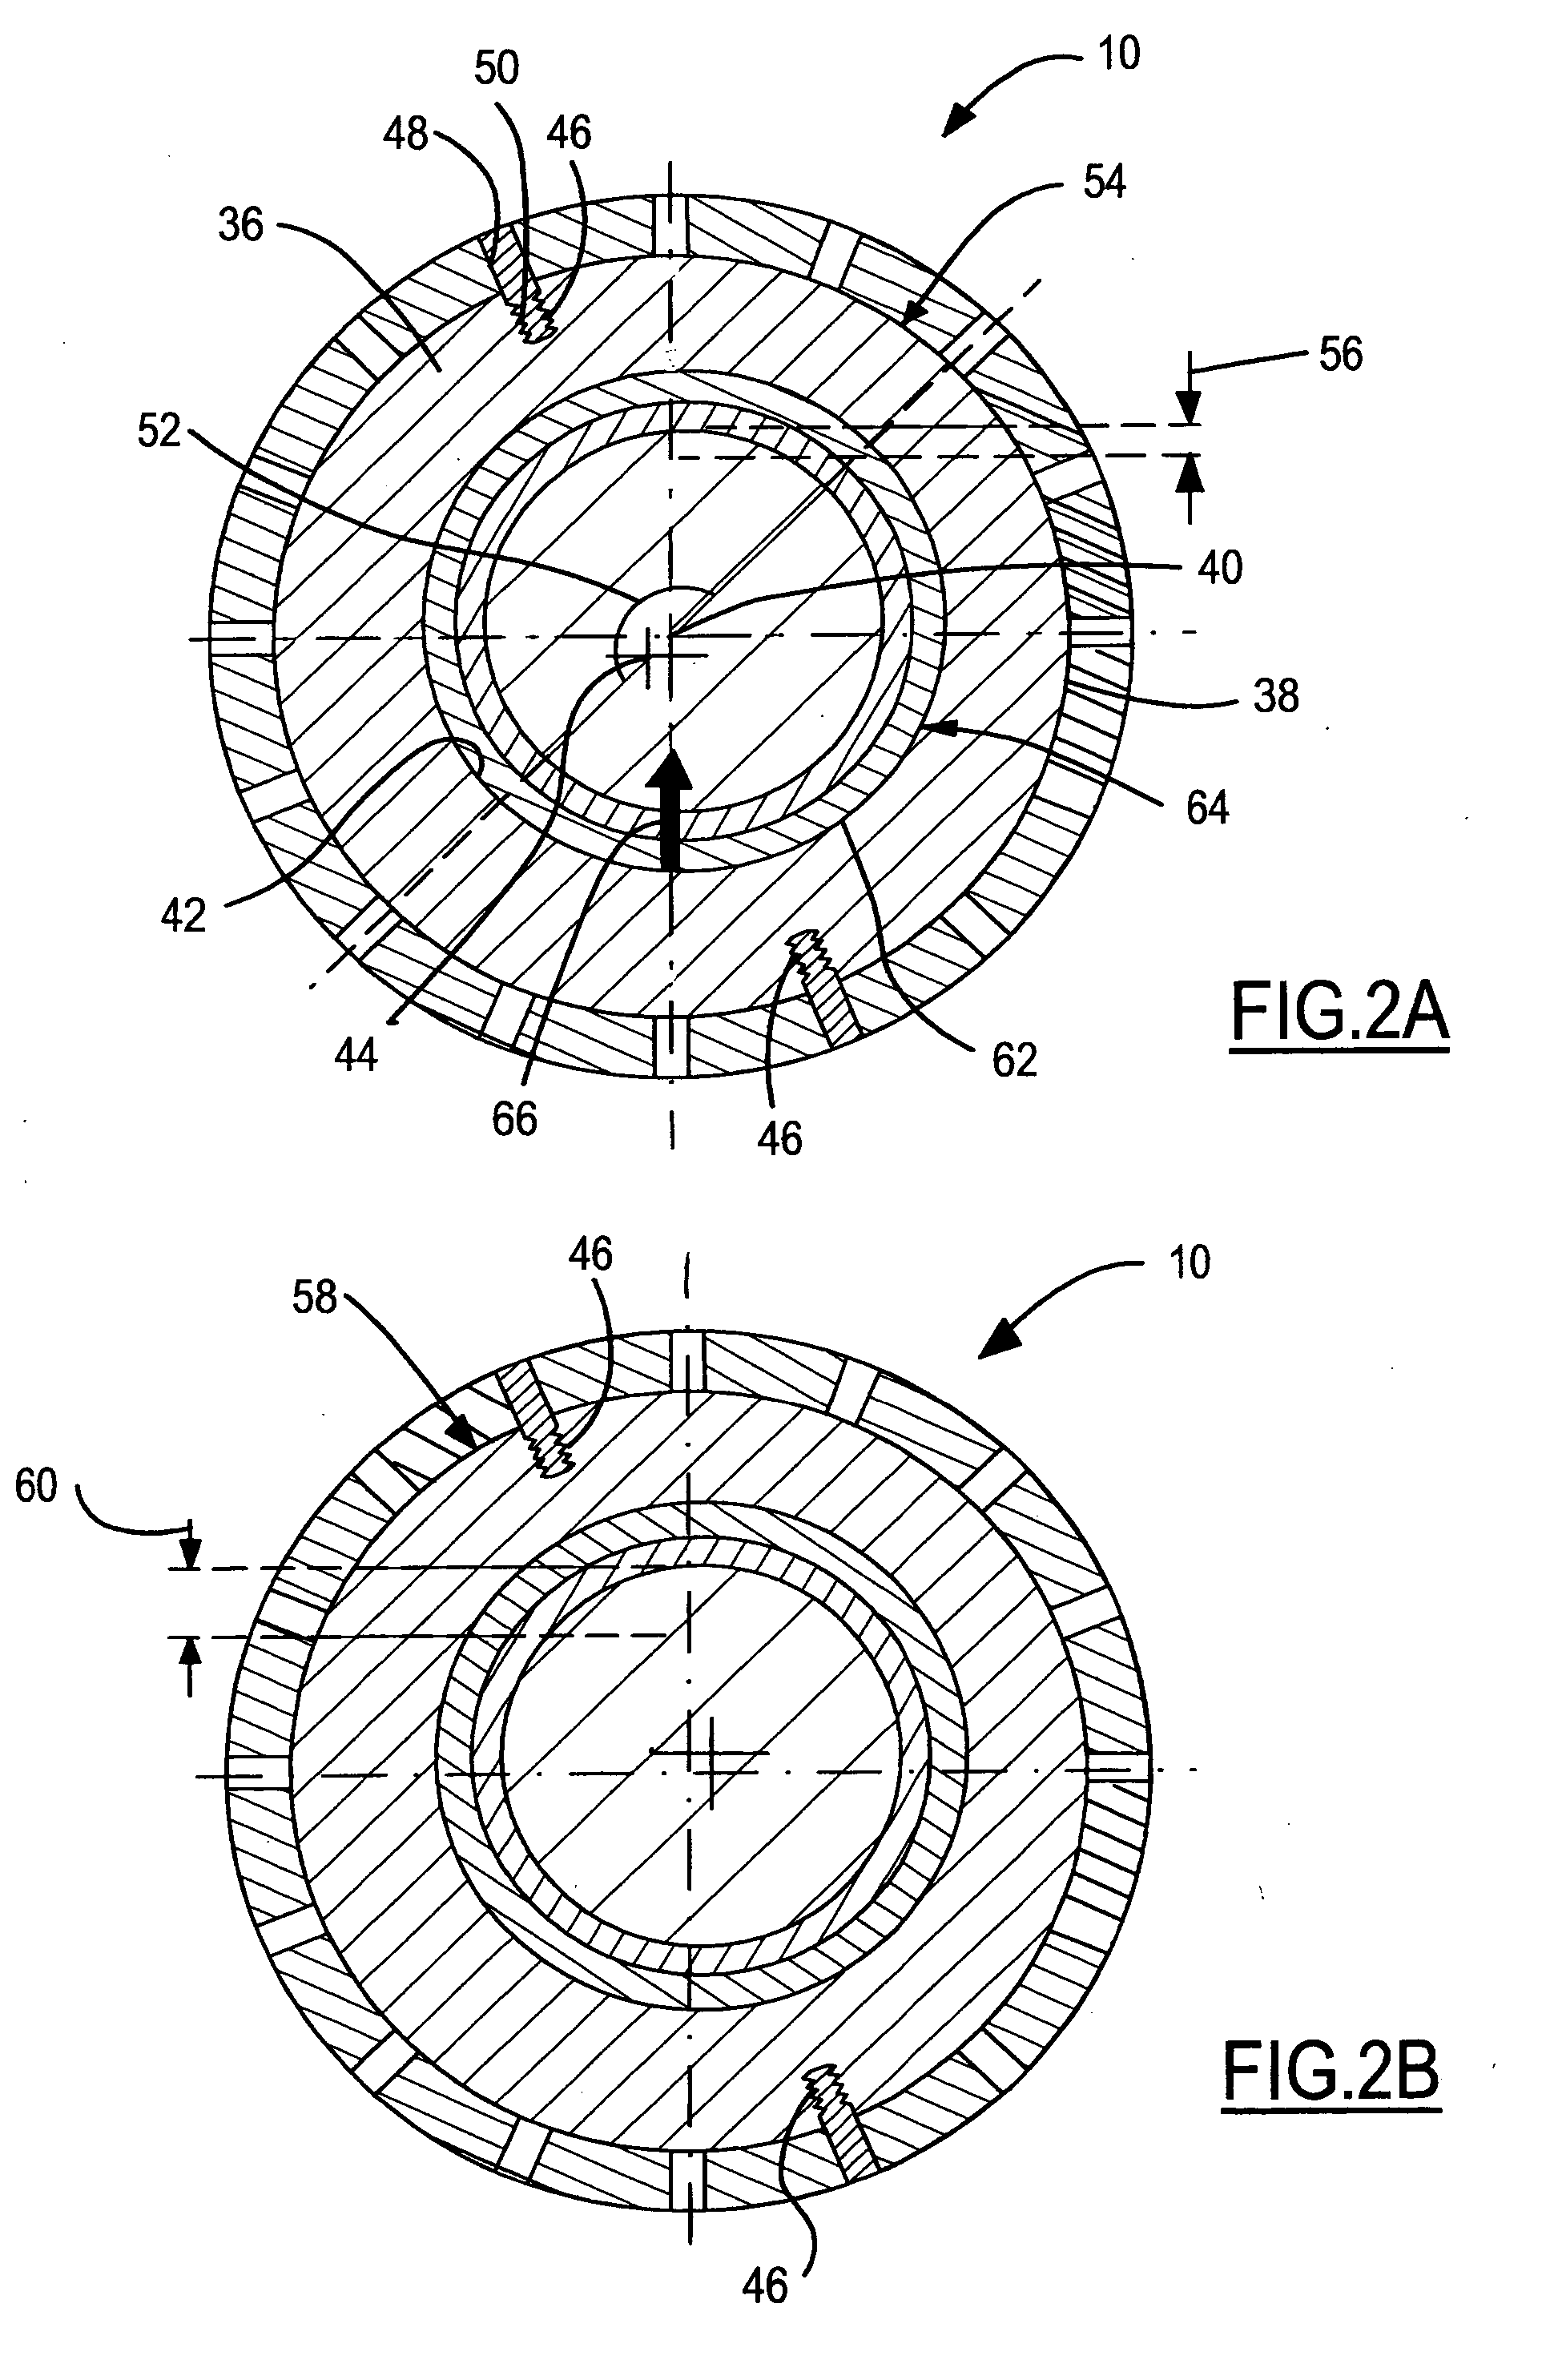 Mesh control for a rack and pinion steering system